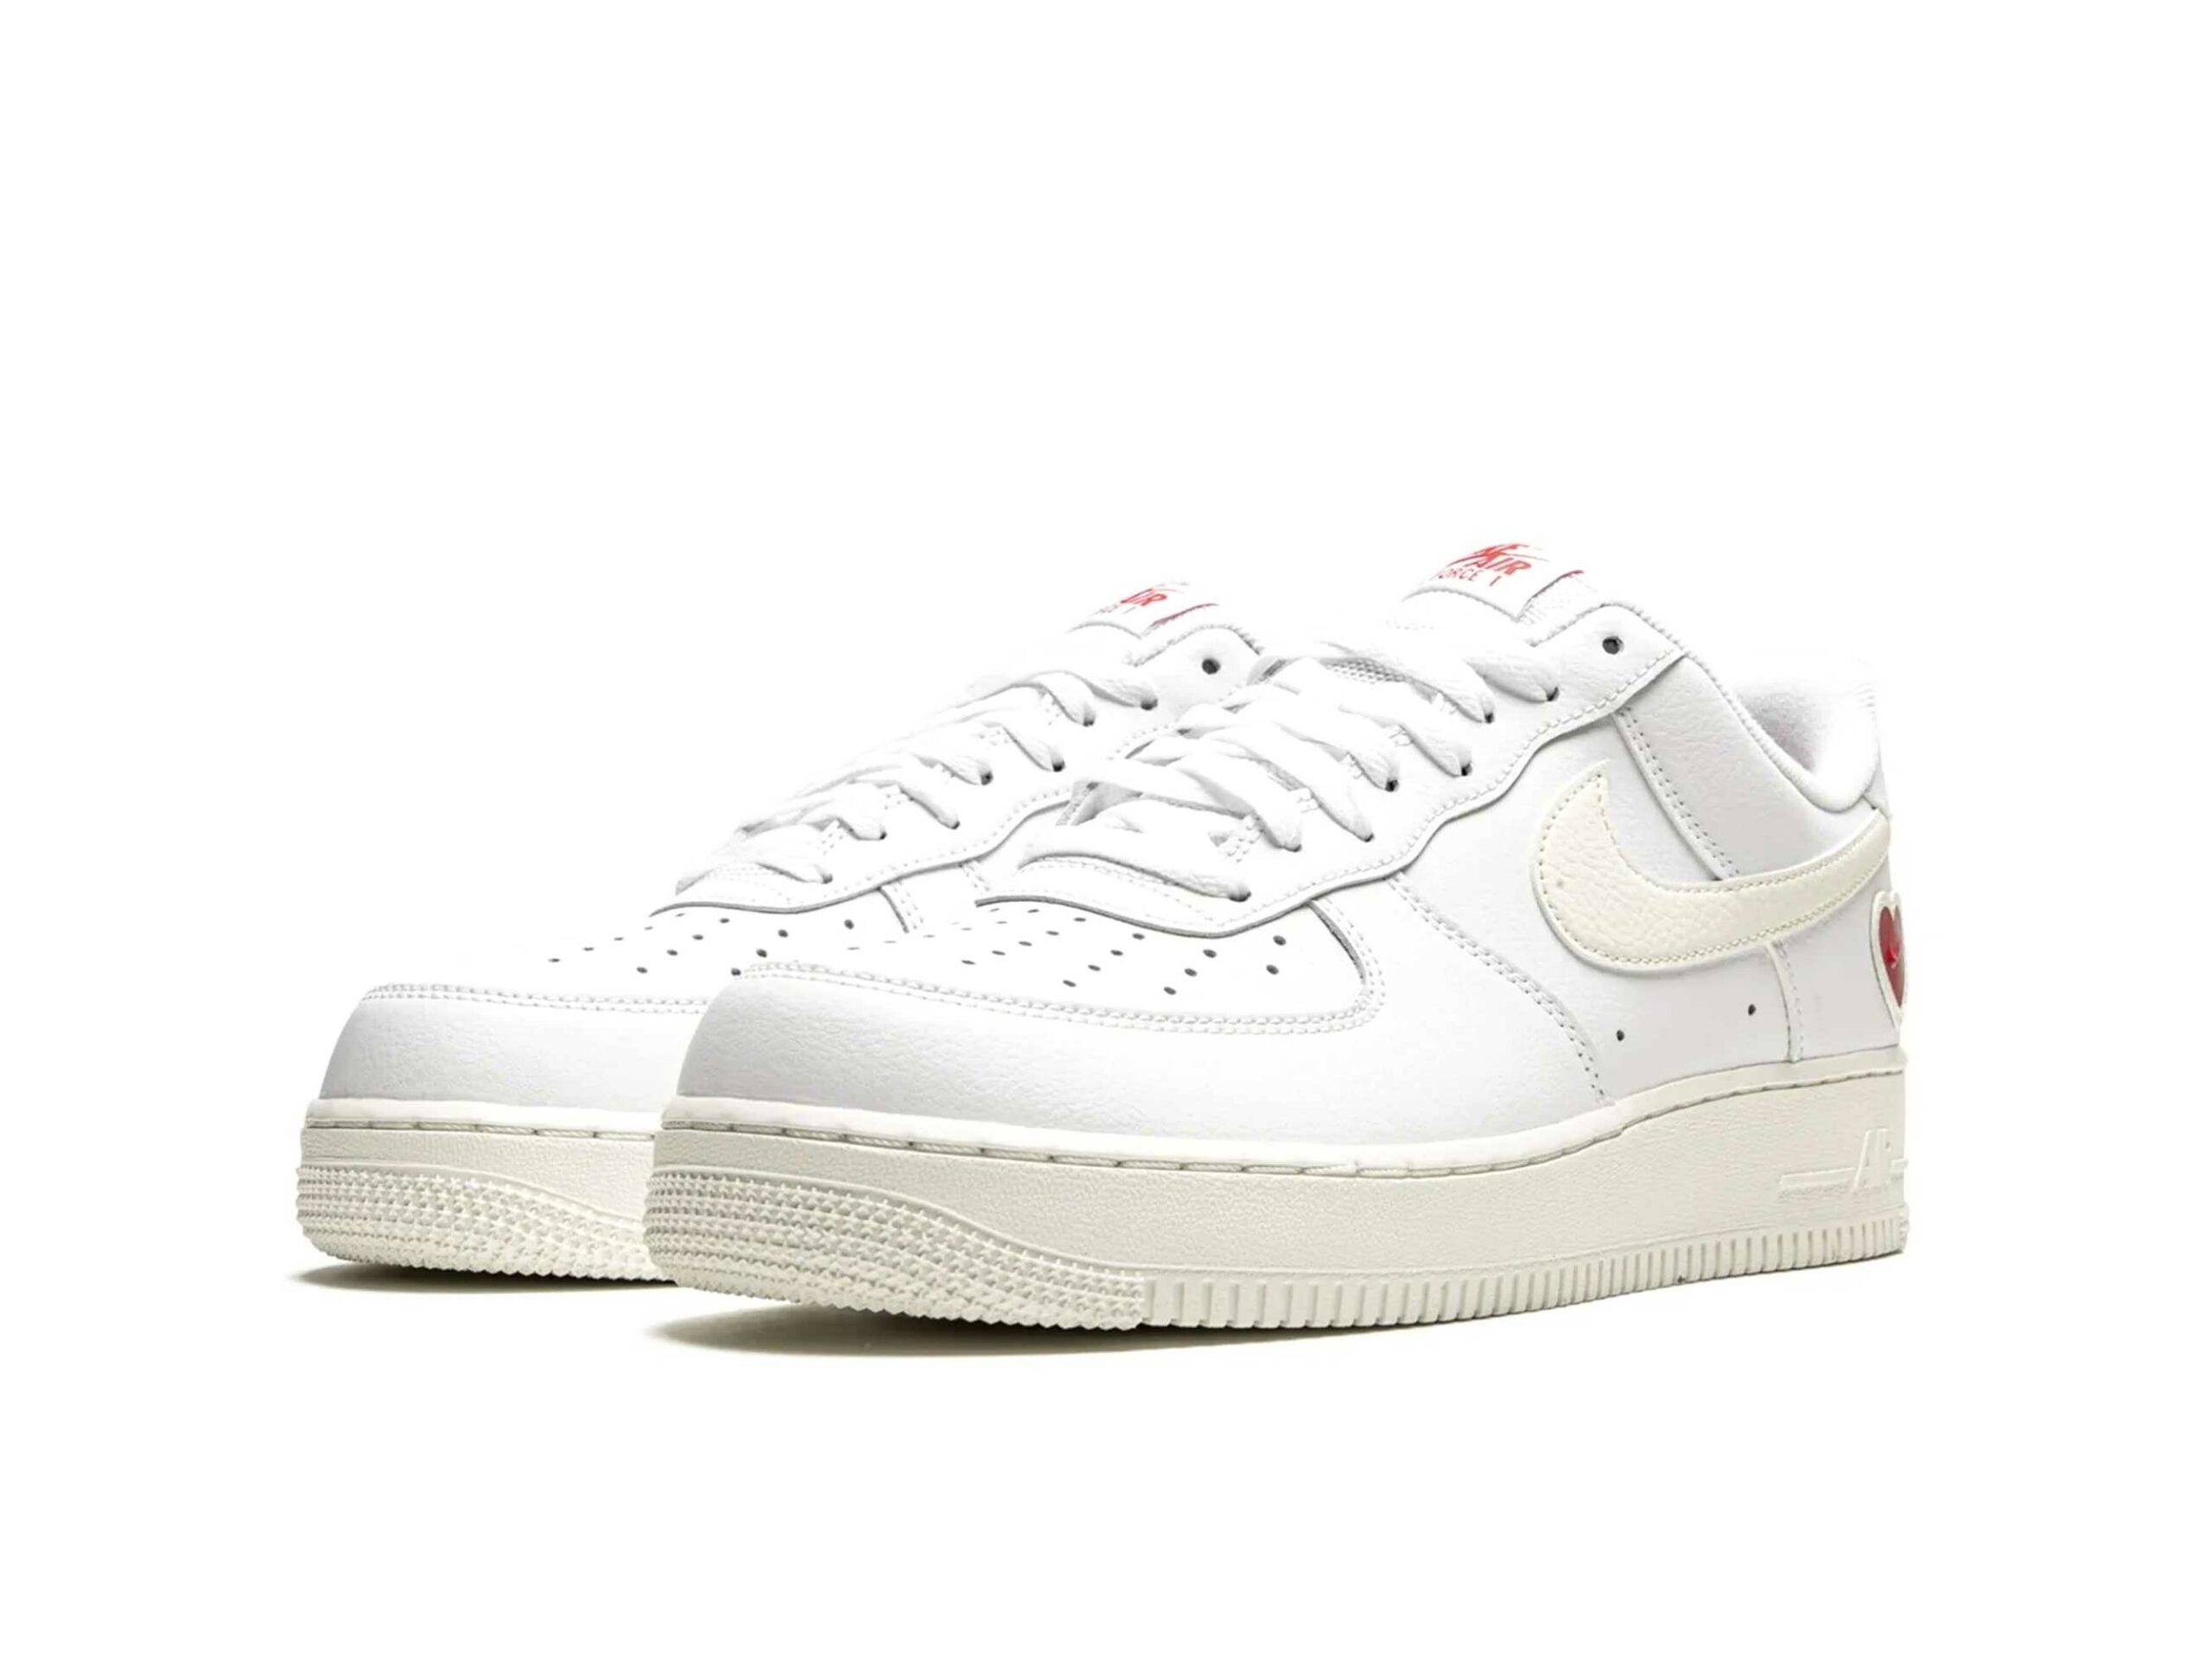 Air force 1 low valentine s day. Nike Air Force Valentines Day 2021. Nike Air Force 1 Low Valentines Day 2021. Nike Air Force 1 Low Valentines Day. Nike Air Force 1’07 “Valentines Day” (2021).